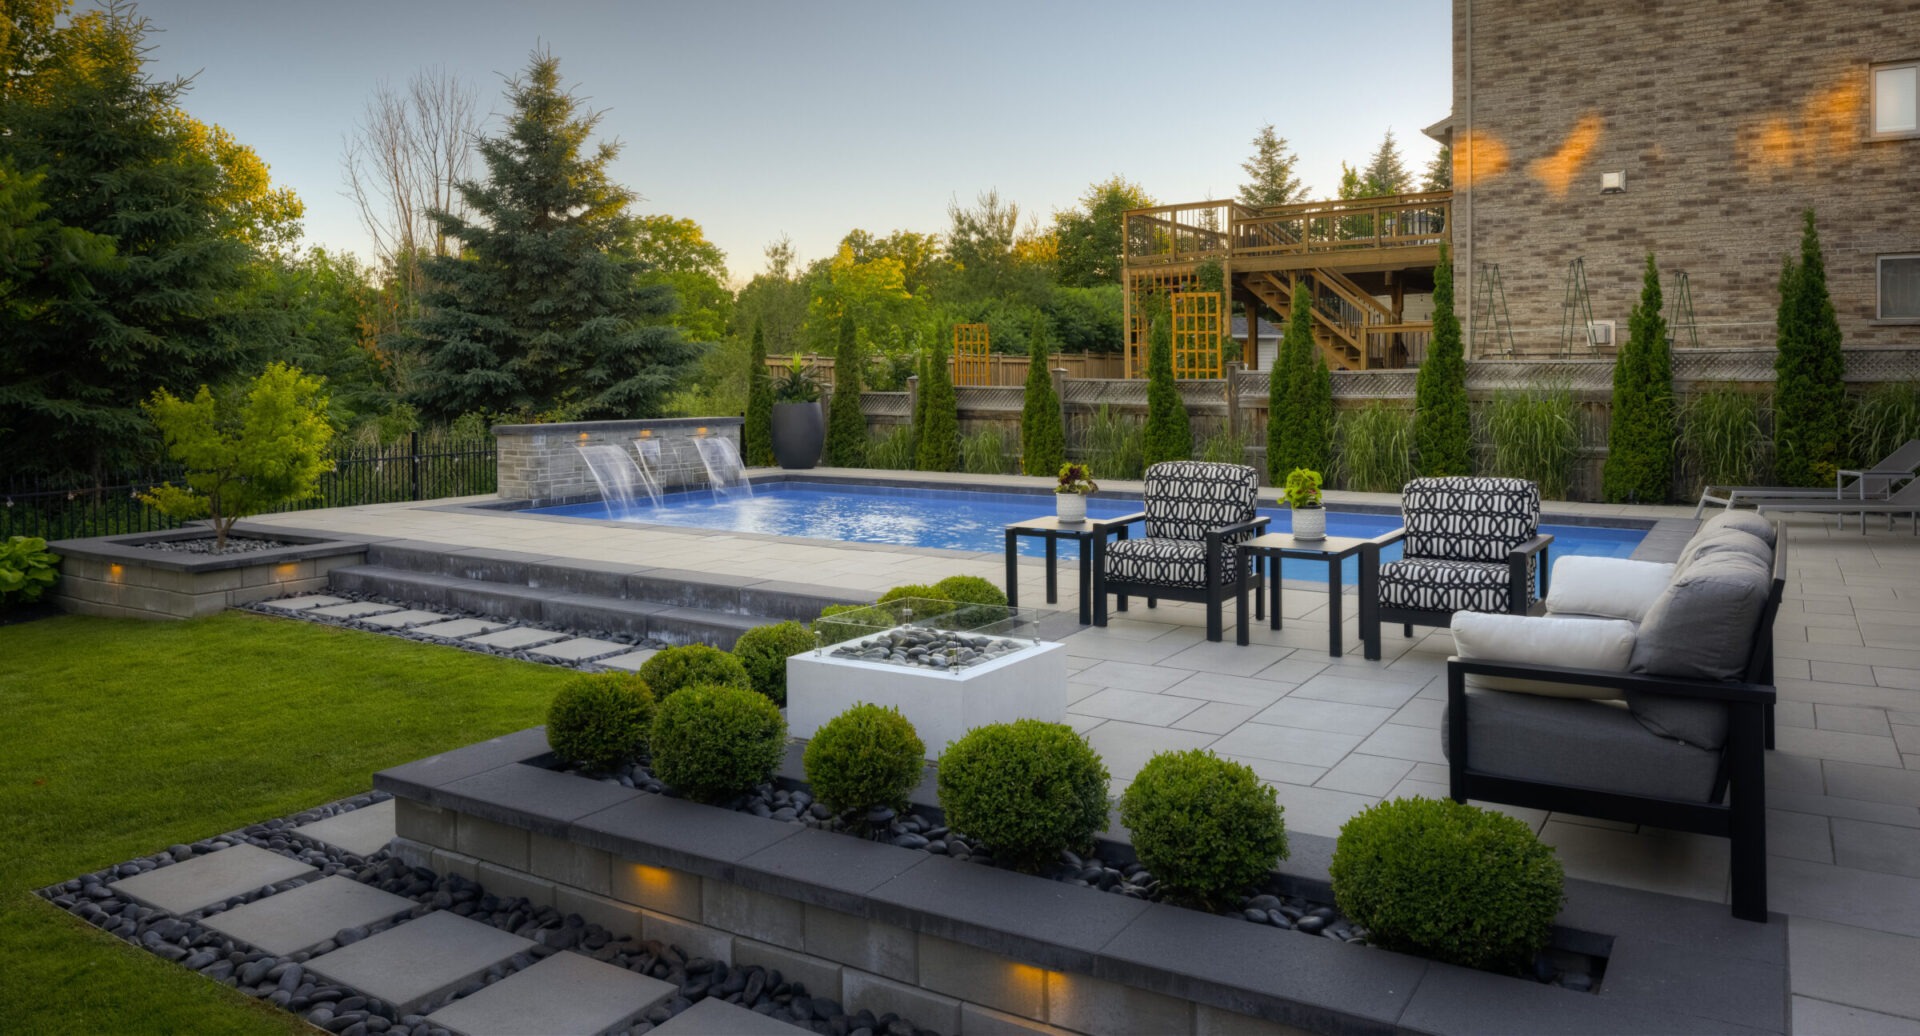 An elegant backyard with a swimming pool, fountain, modern furniture, manicured bushes, and a two-level wooden deck surrounded by lush greenery at dusk.